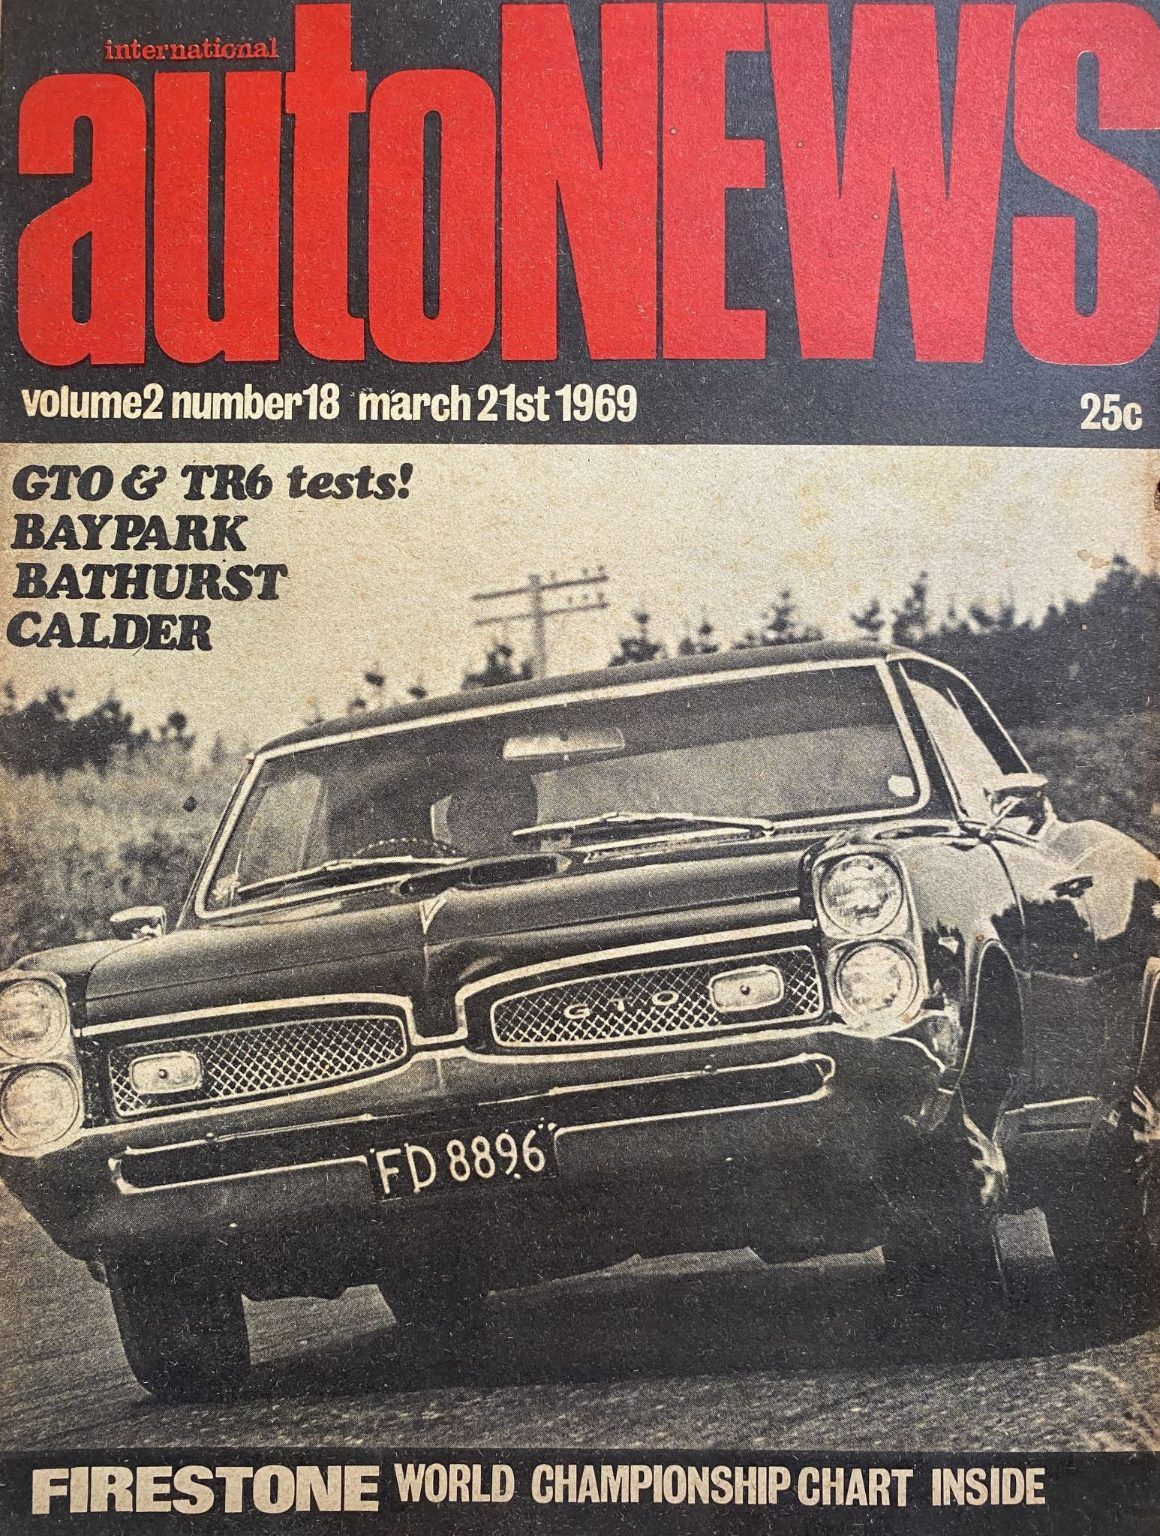 OLD MAGAZINE: International Auto News - Vol. 2, Number 18, 21st March 1969